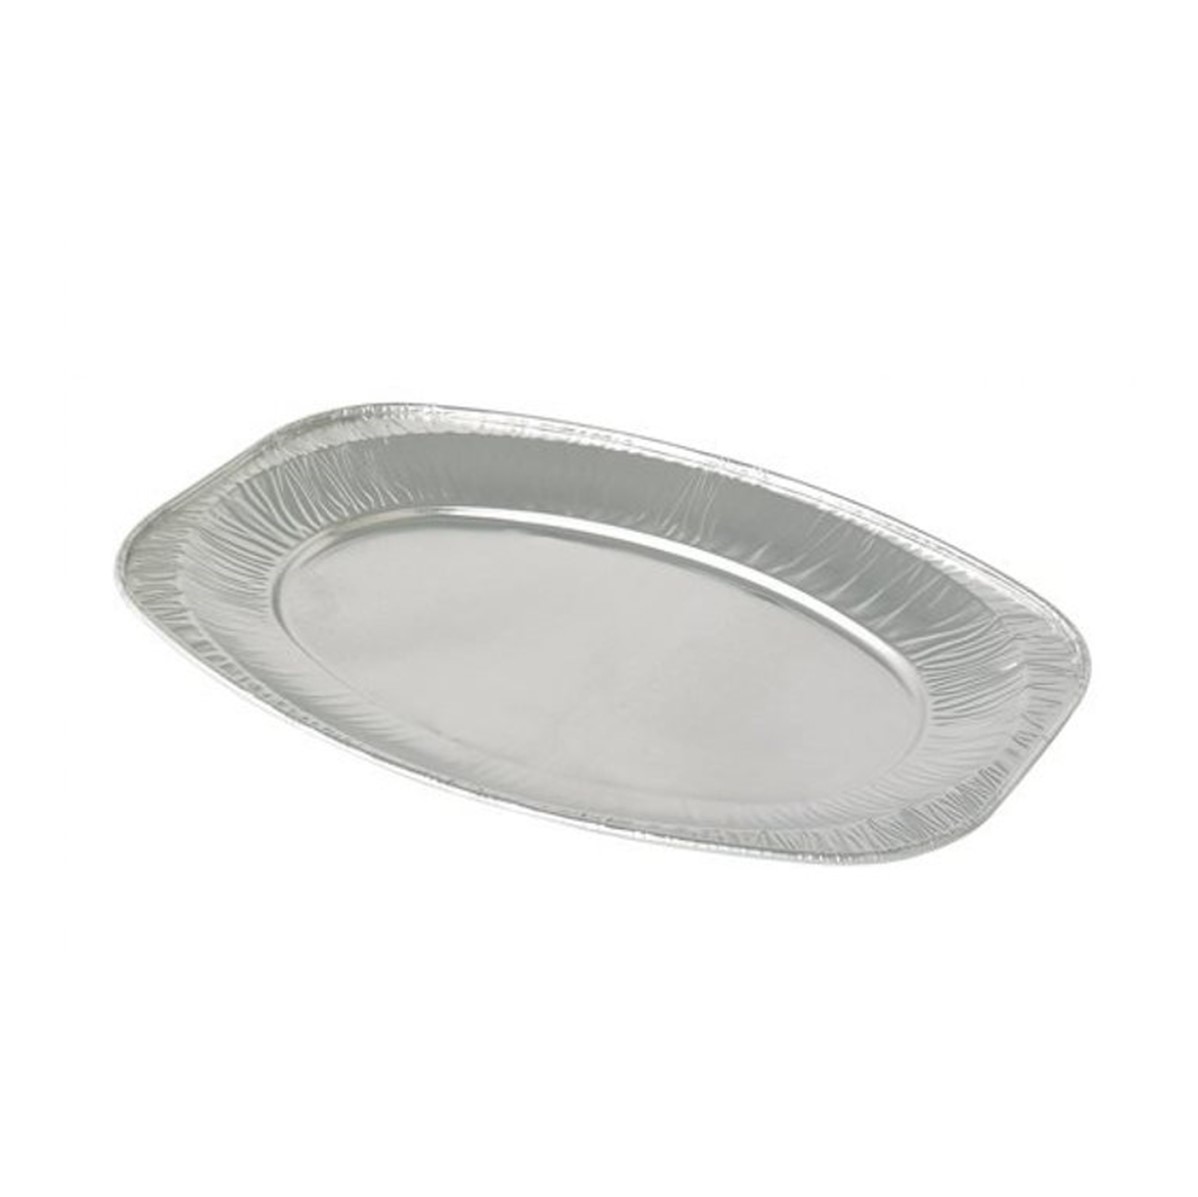 RY Caterpack Foil Platters [Oval] - 6x35cm platters